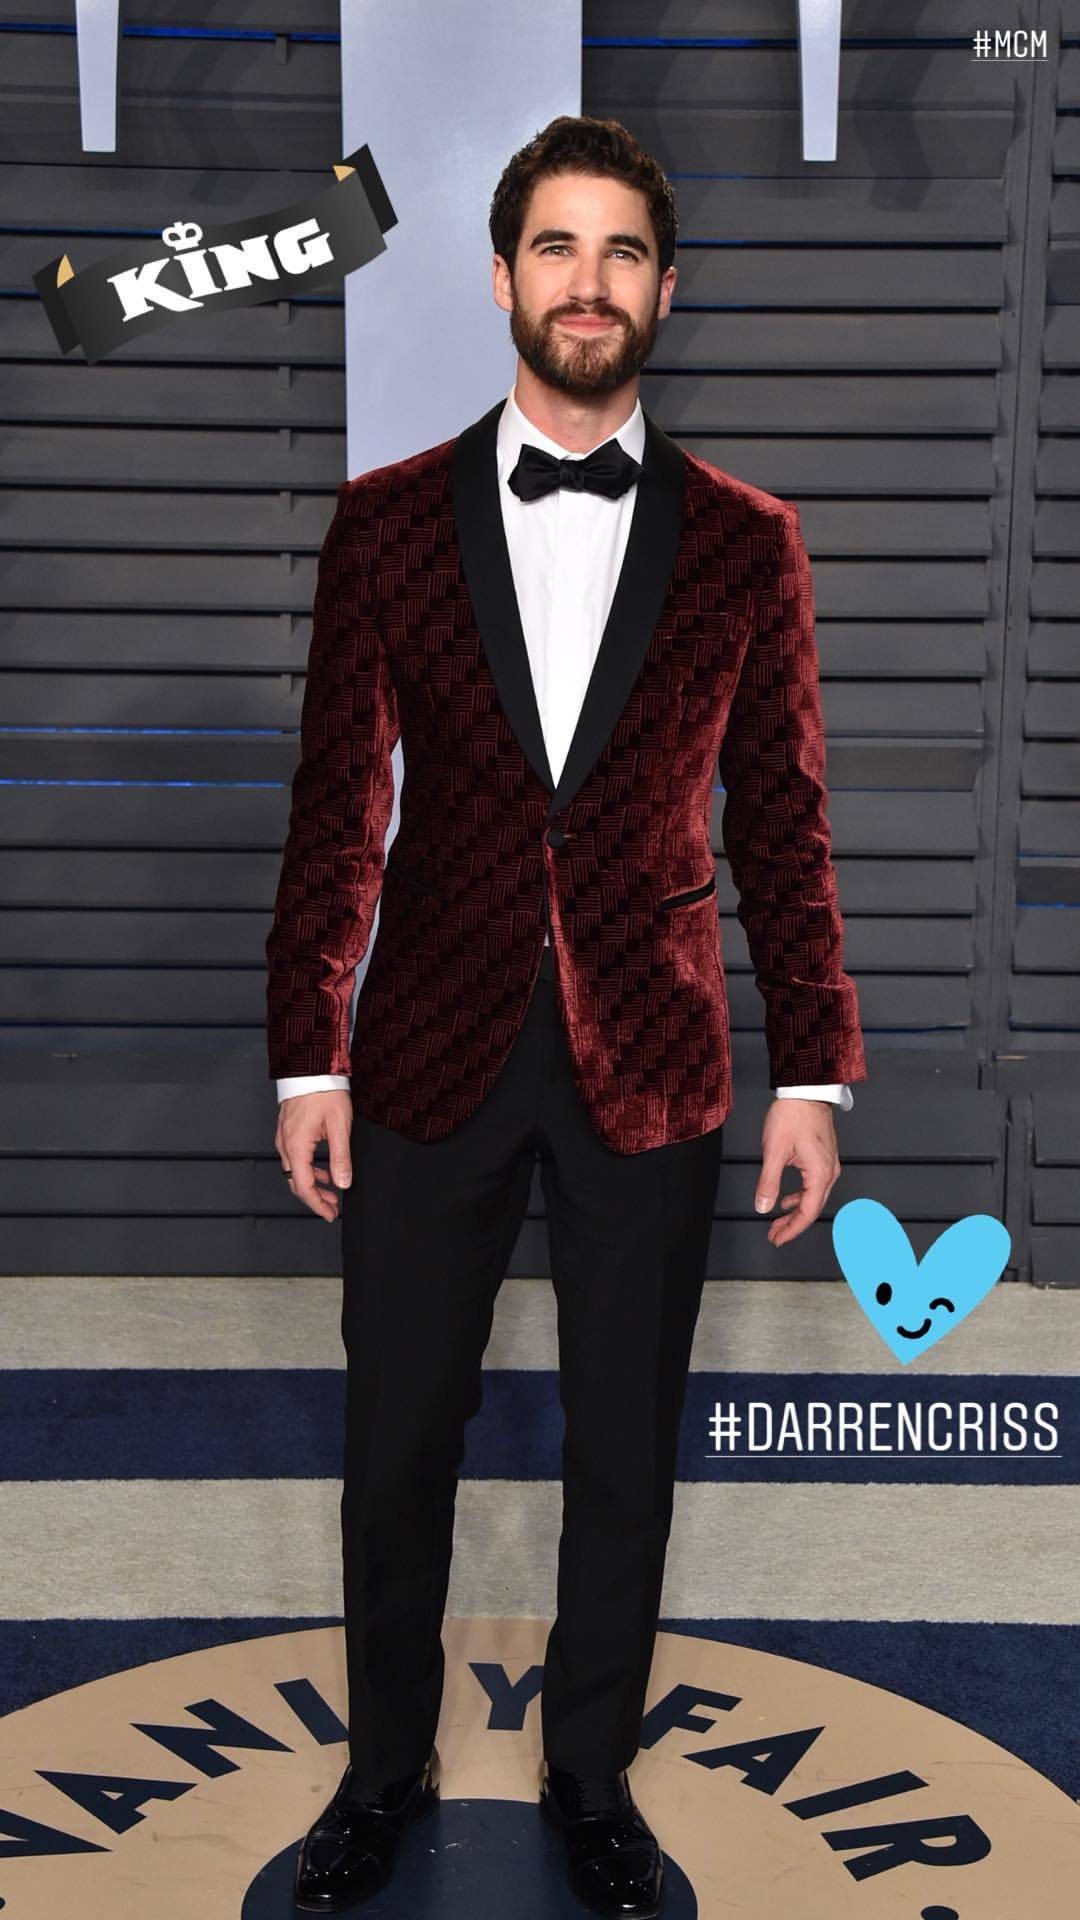 fxallstarparty - Darren's Miscellaneous Projects and Events for 2018 - Page 3 Tumblr_p67xapBh3g1wpi2k2o1_1280